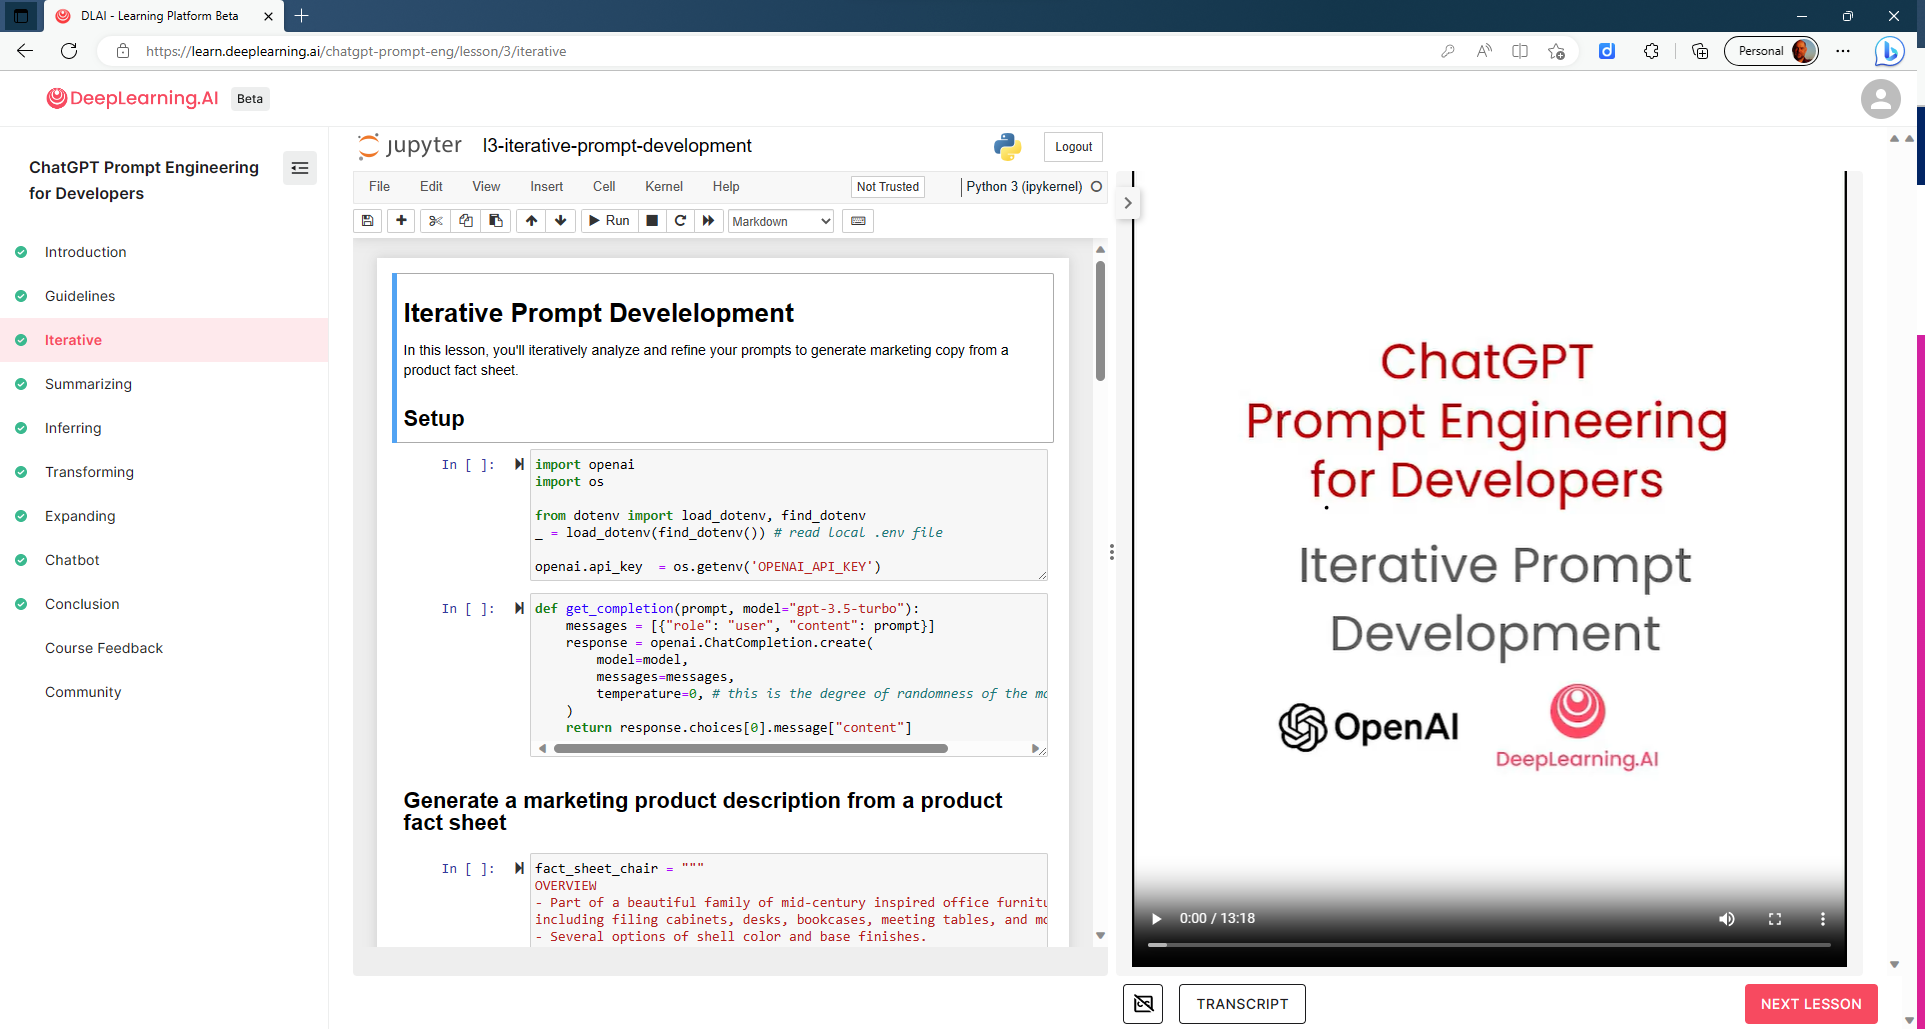 ChatGPT prompt engineering for developers, a course